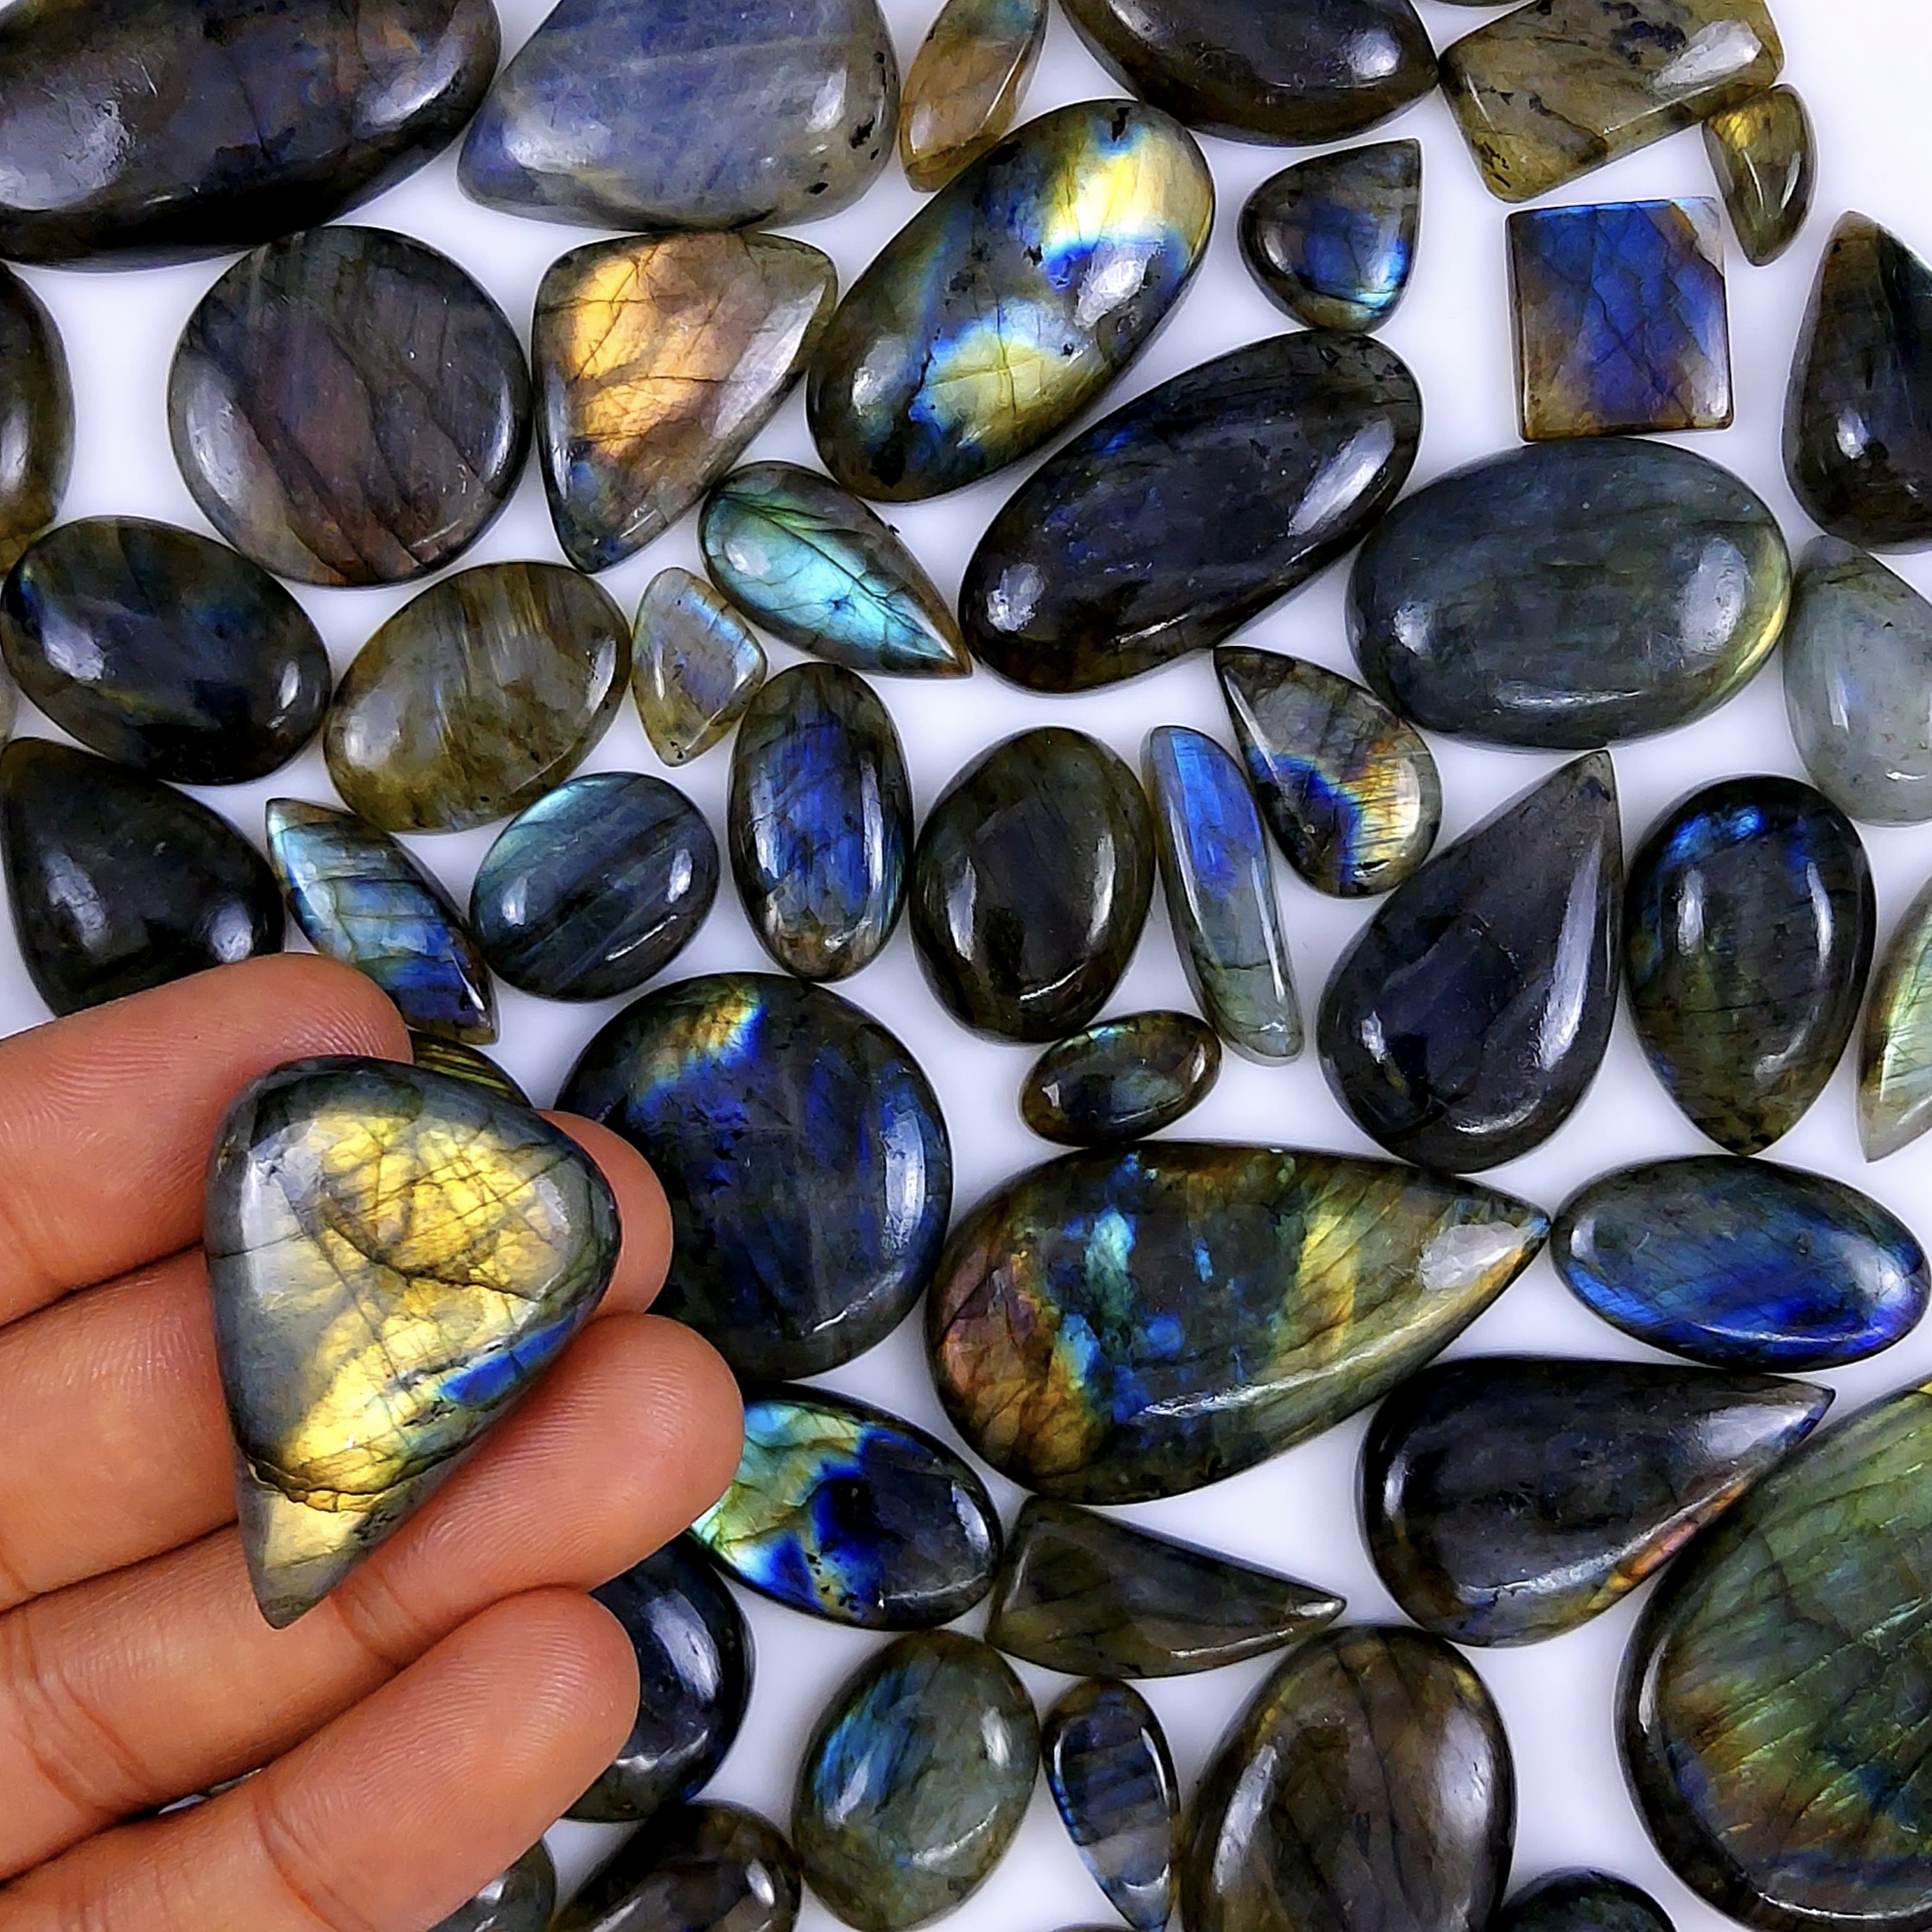 58pc 1749Cts Labradorite Cabochon Multifire Healing Crystal For Jewelry Supplies, Labradorite Necklace Handmade Wire Wrapped Gemstone Pendant 50x25 12x9mm#6253